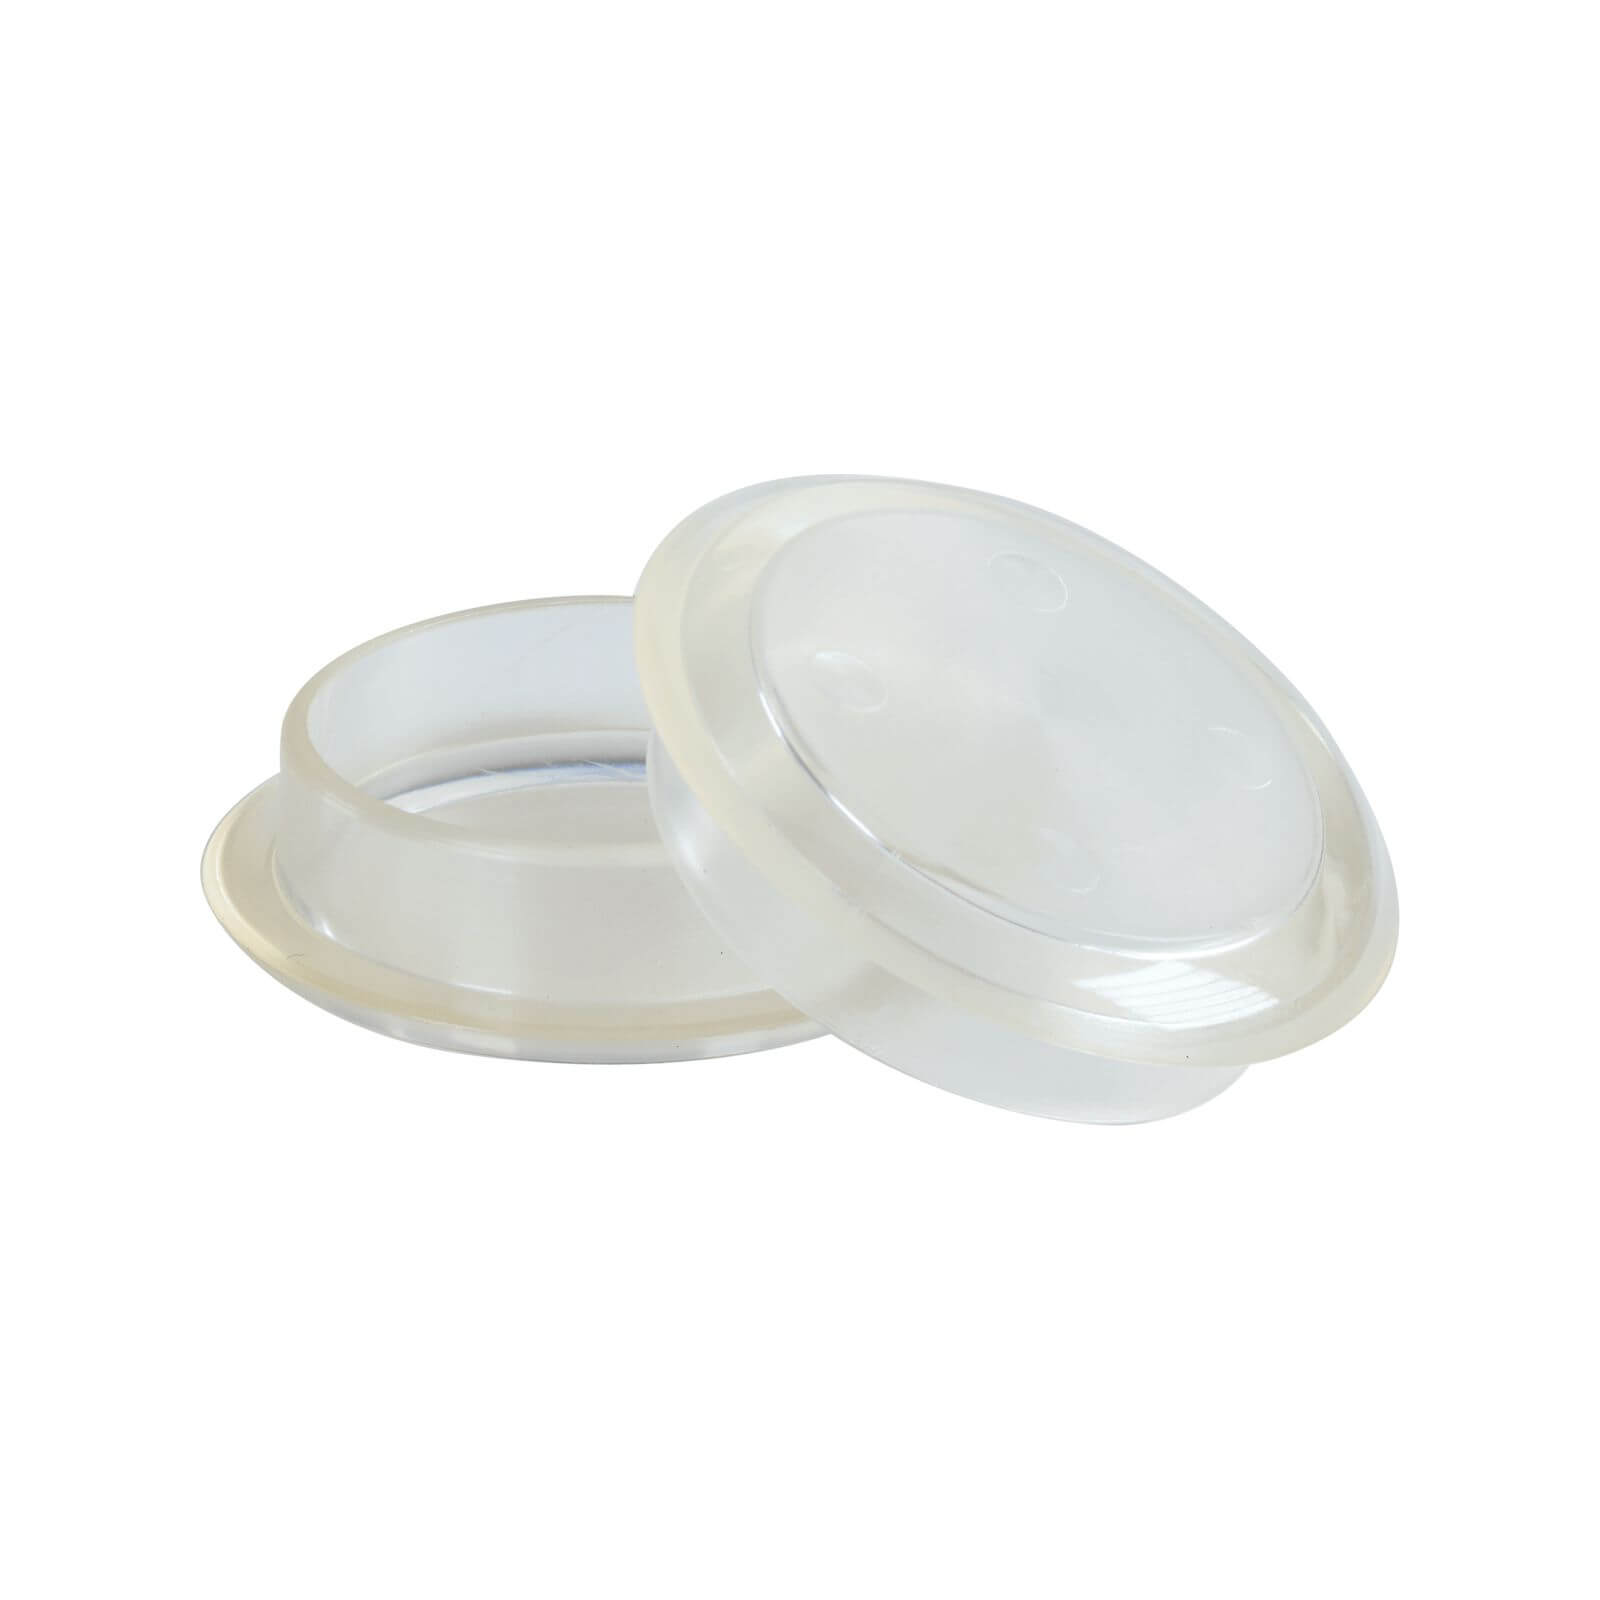 Photo of Castor Cups - Clear - 4 Pack